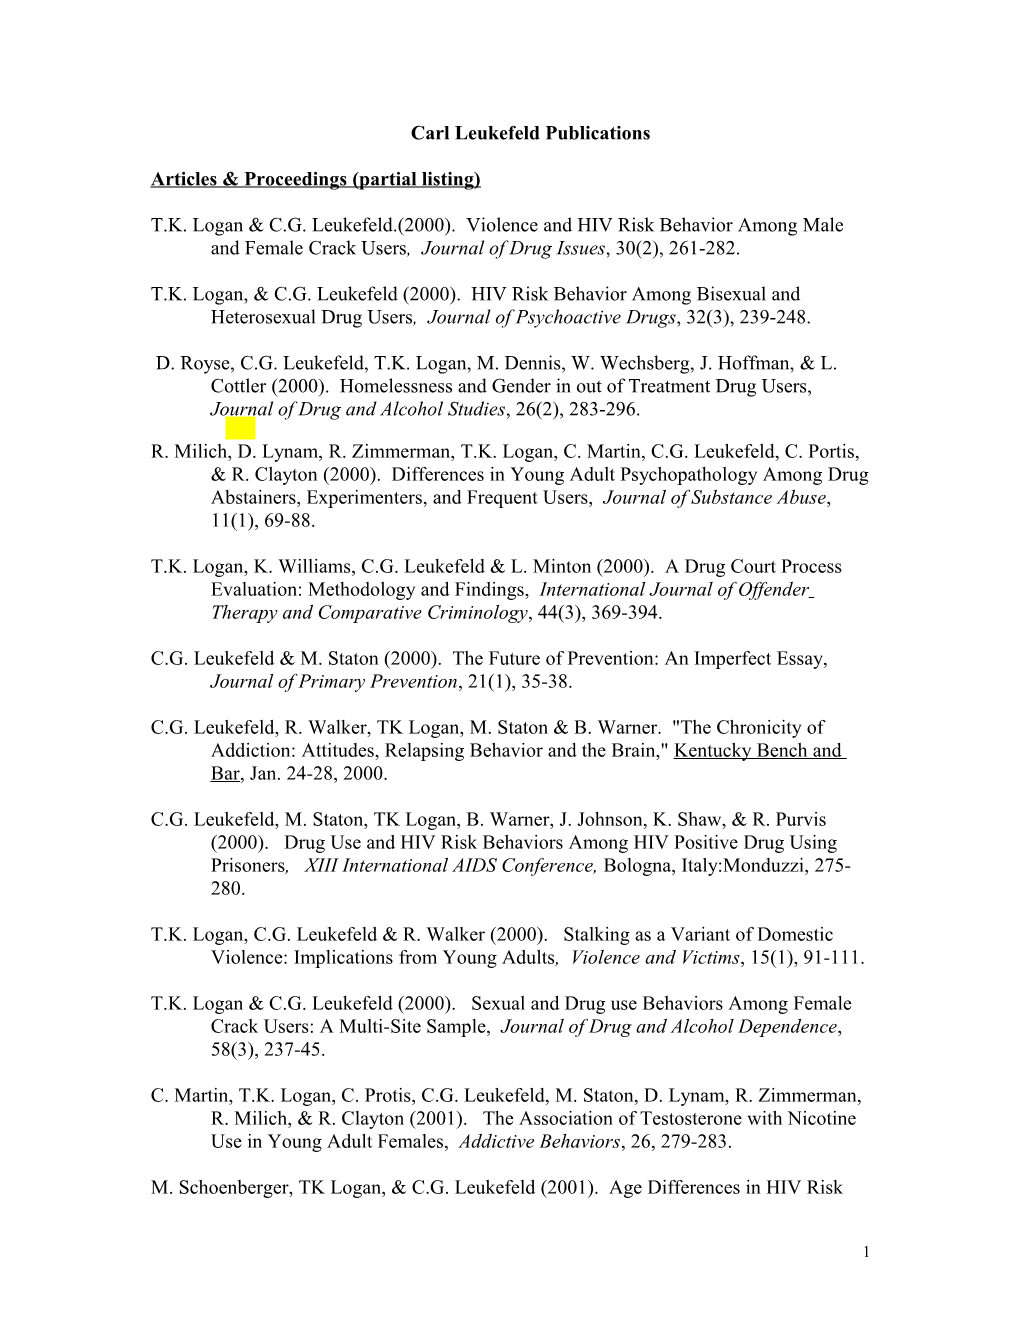 Articles & Proceedings (Partial Listing)